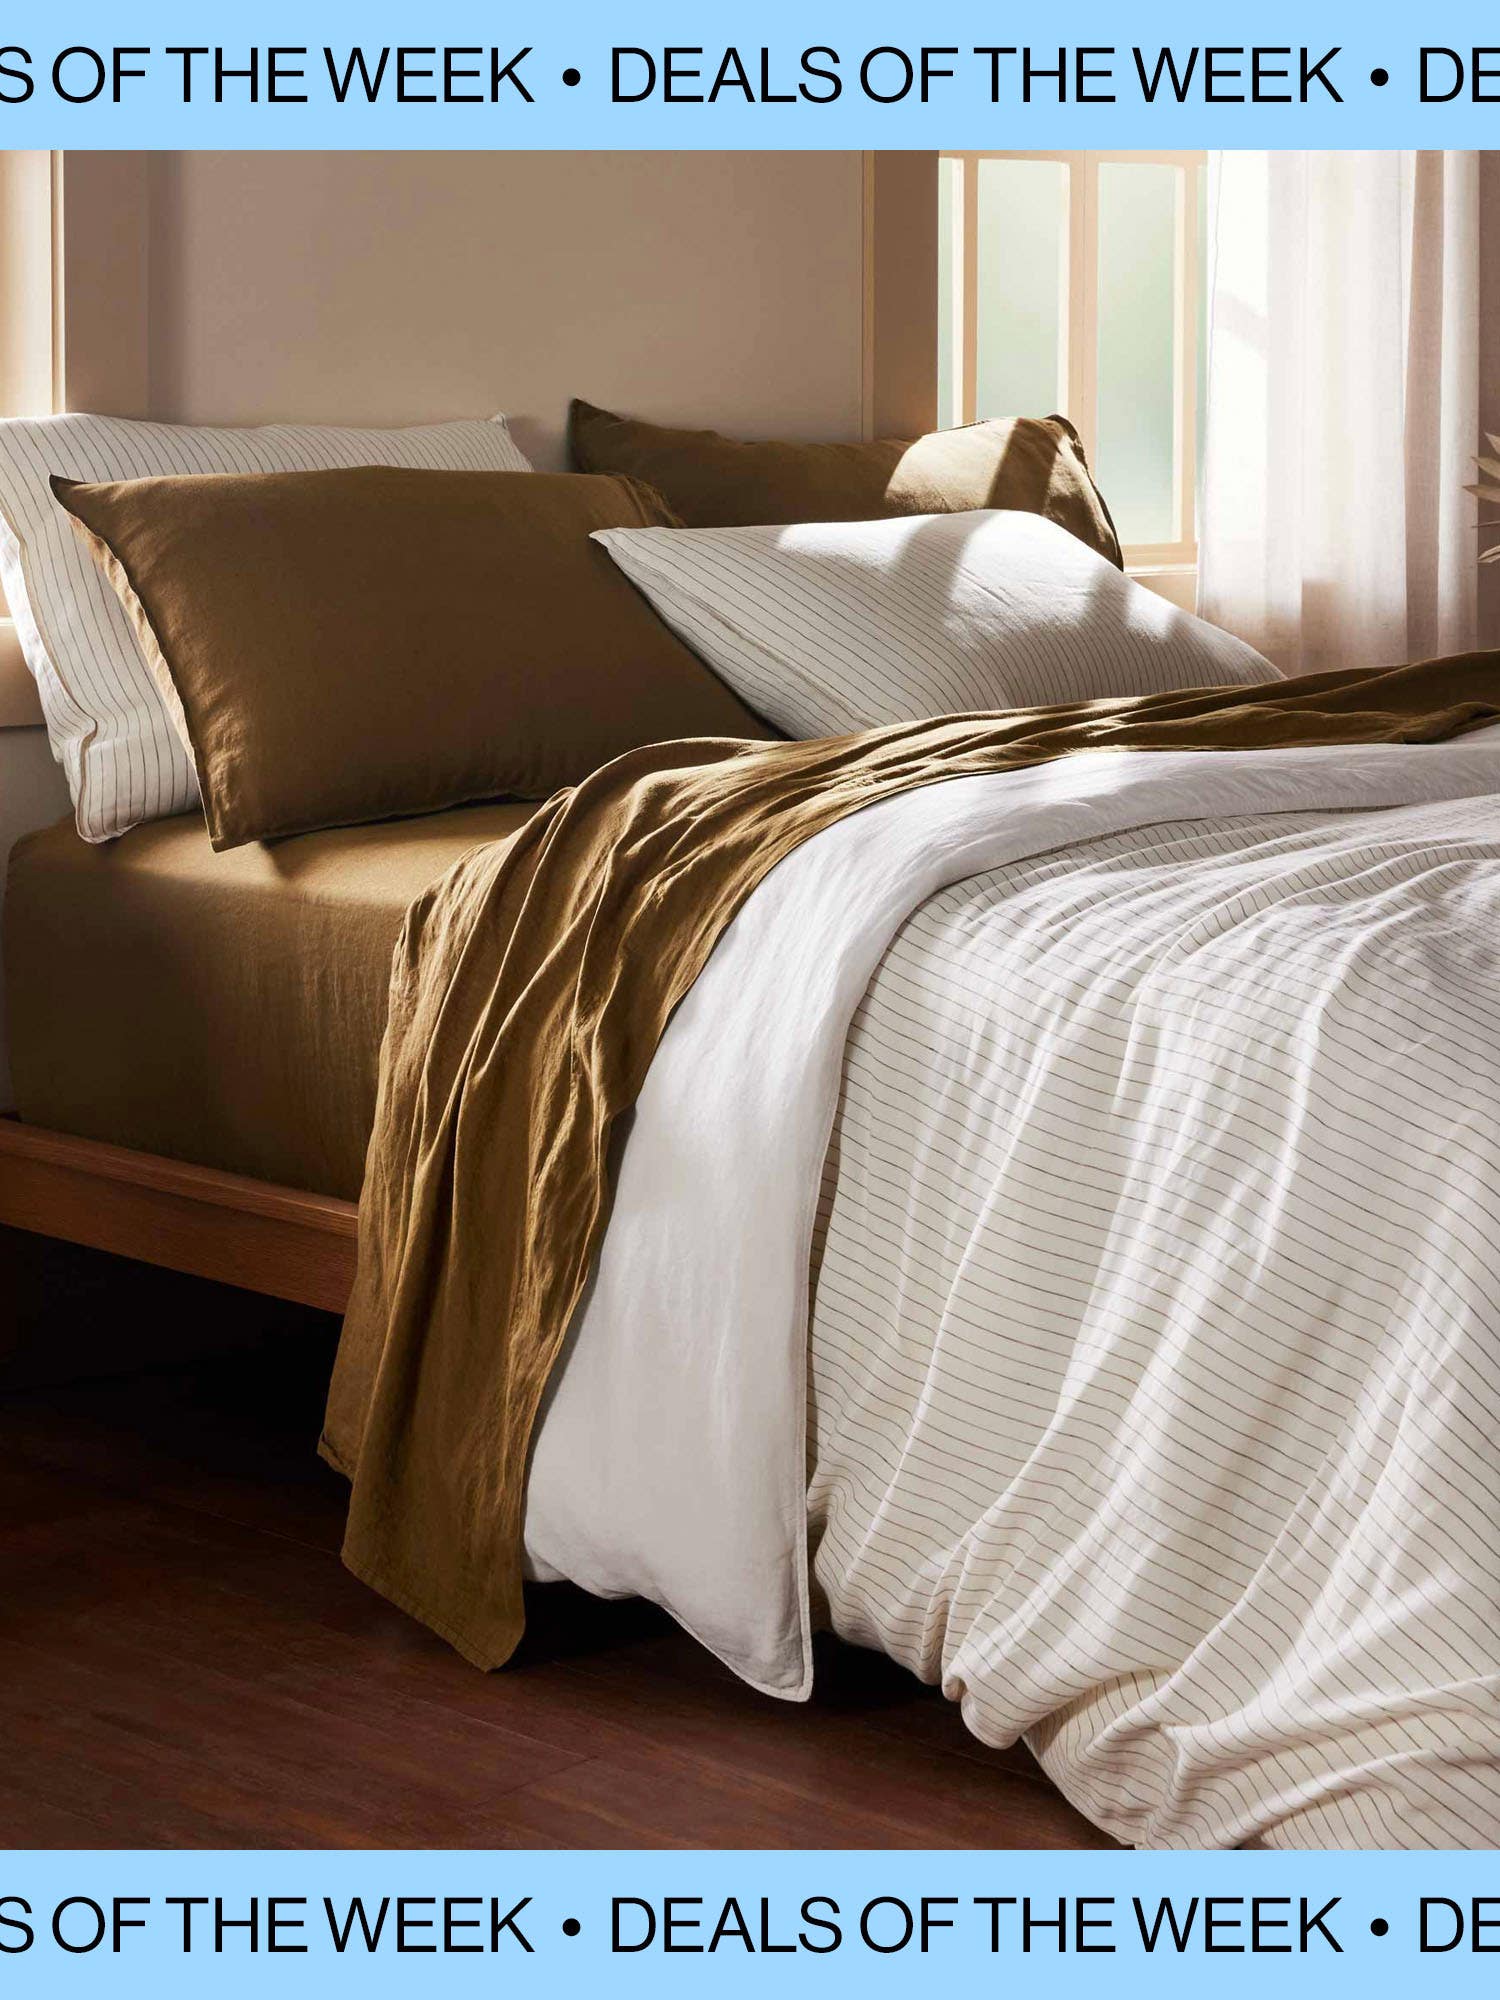 Bed with Brooklinen duvet and sheets on wooden bed frame